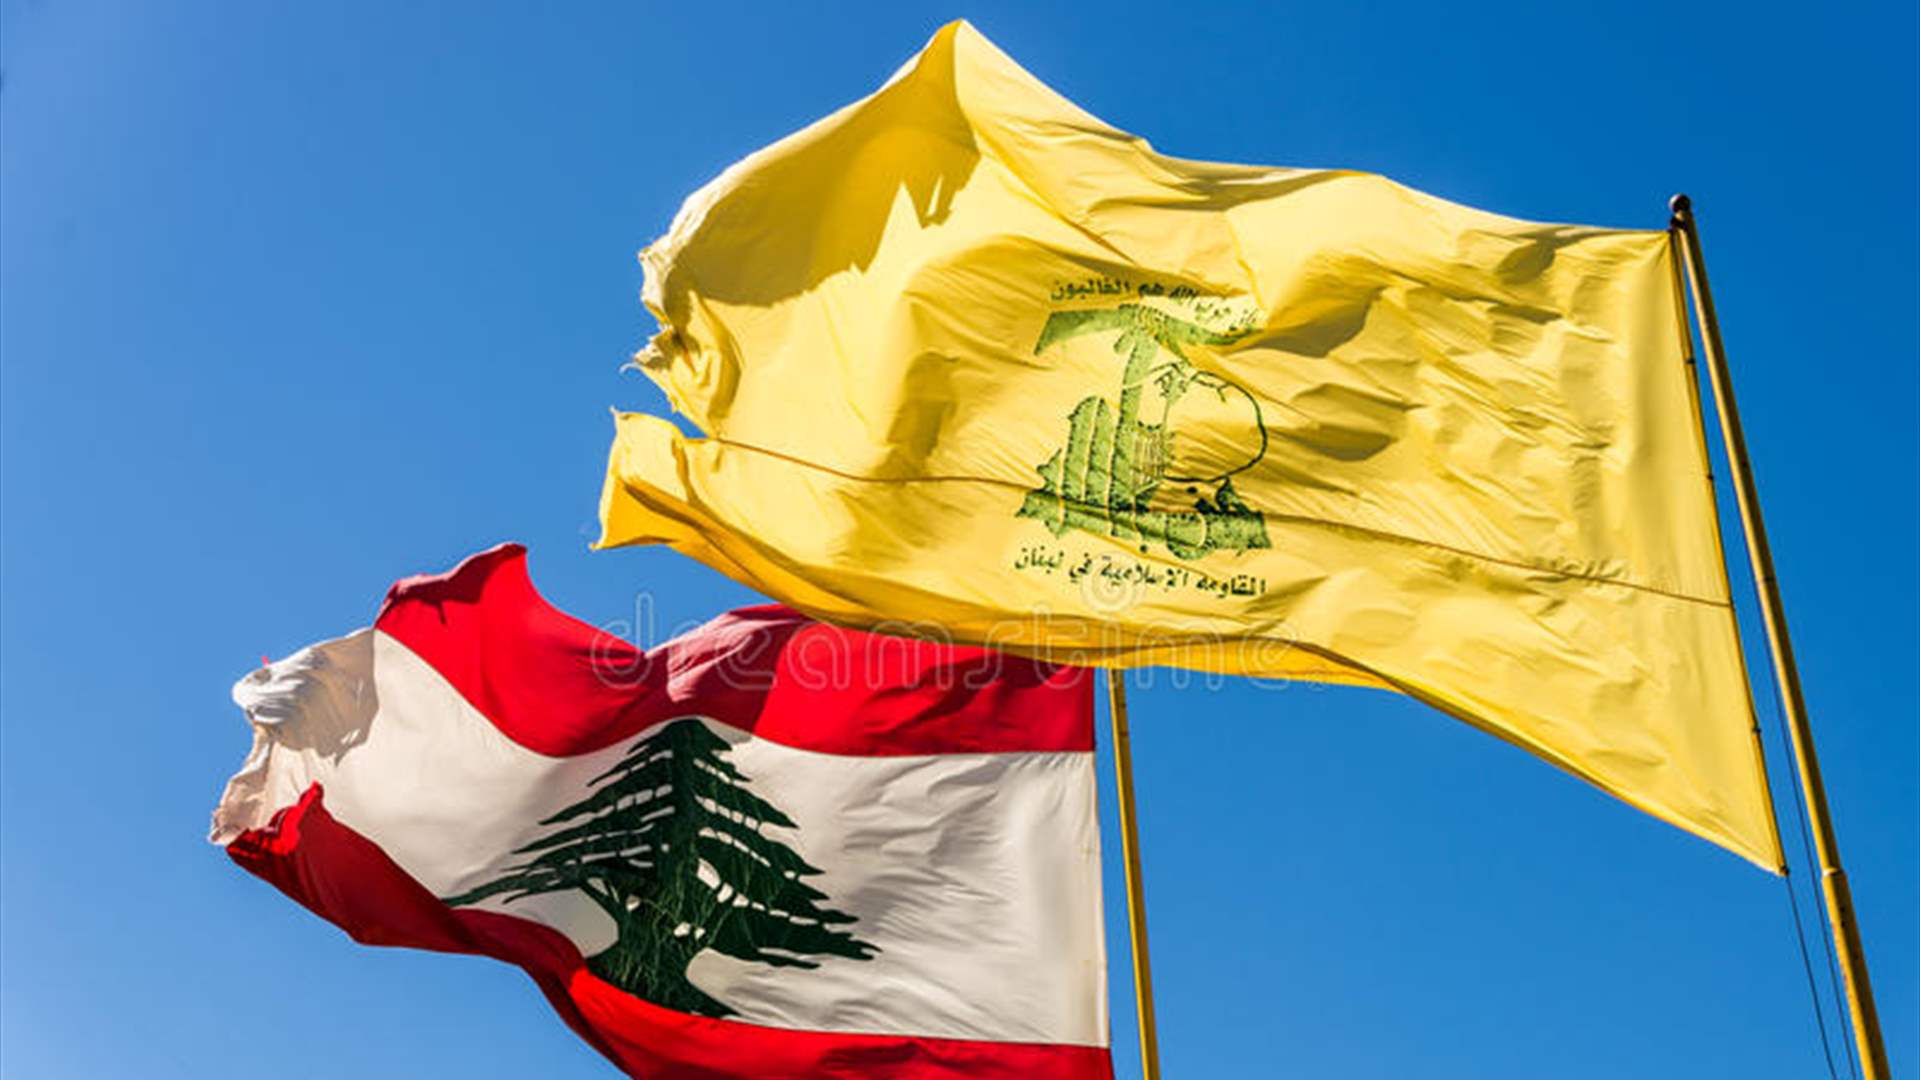 French channel to air documentary on Hezbollah